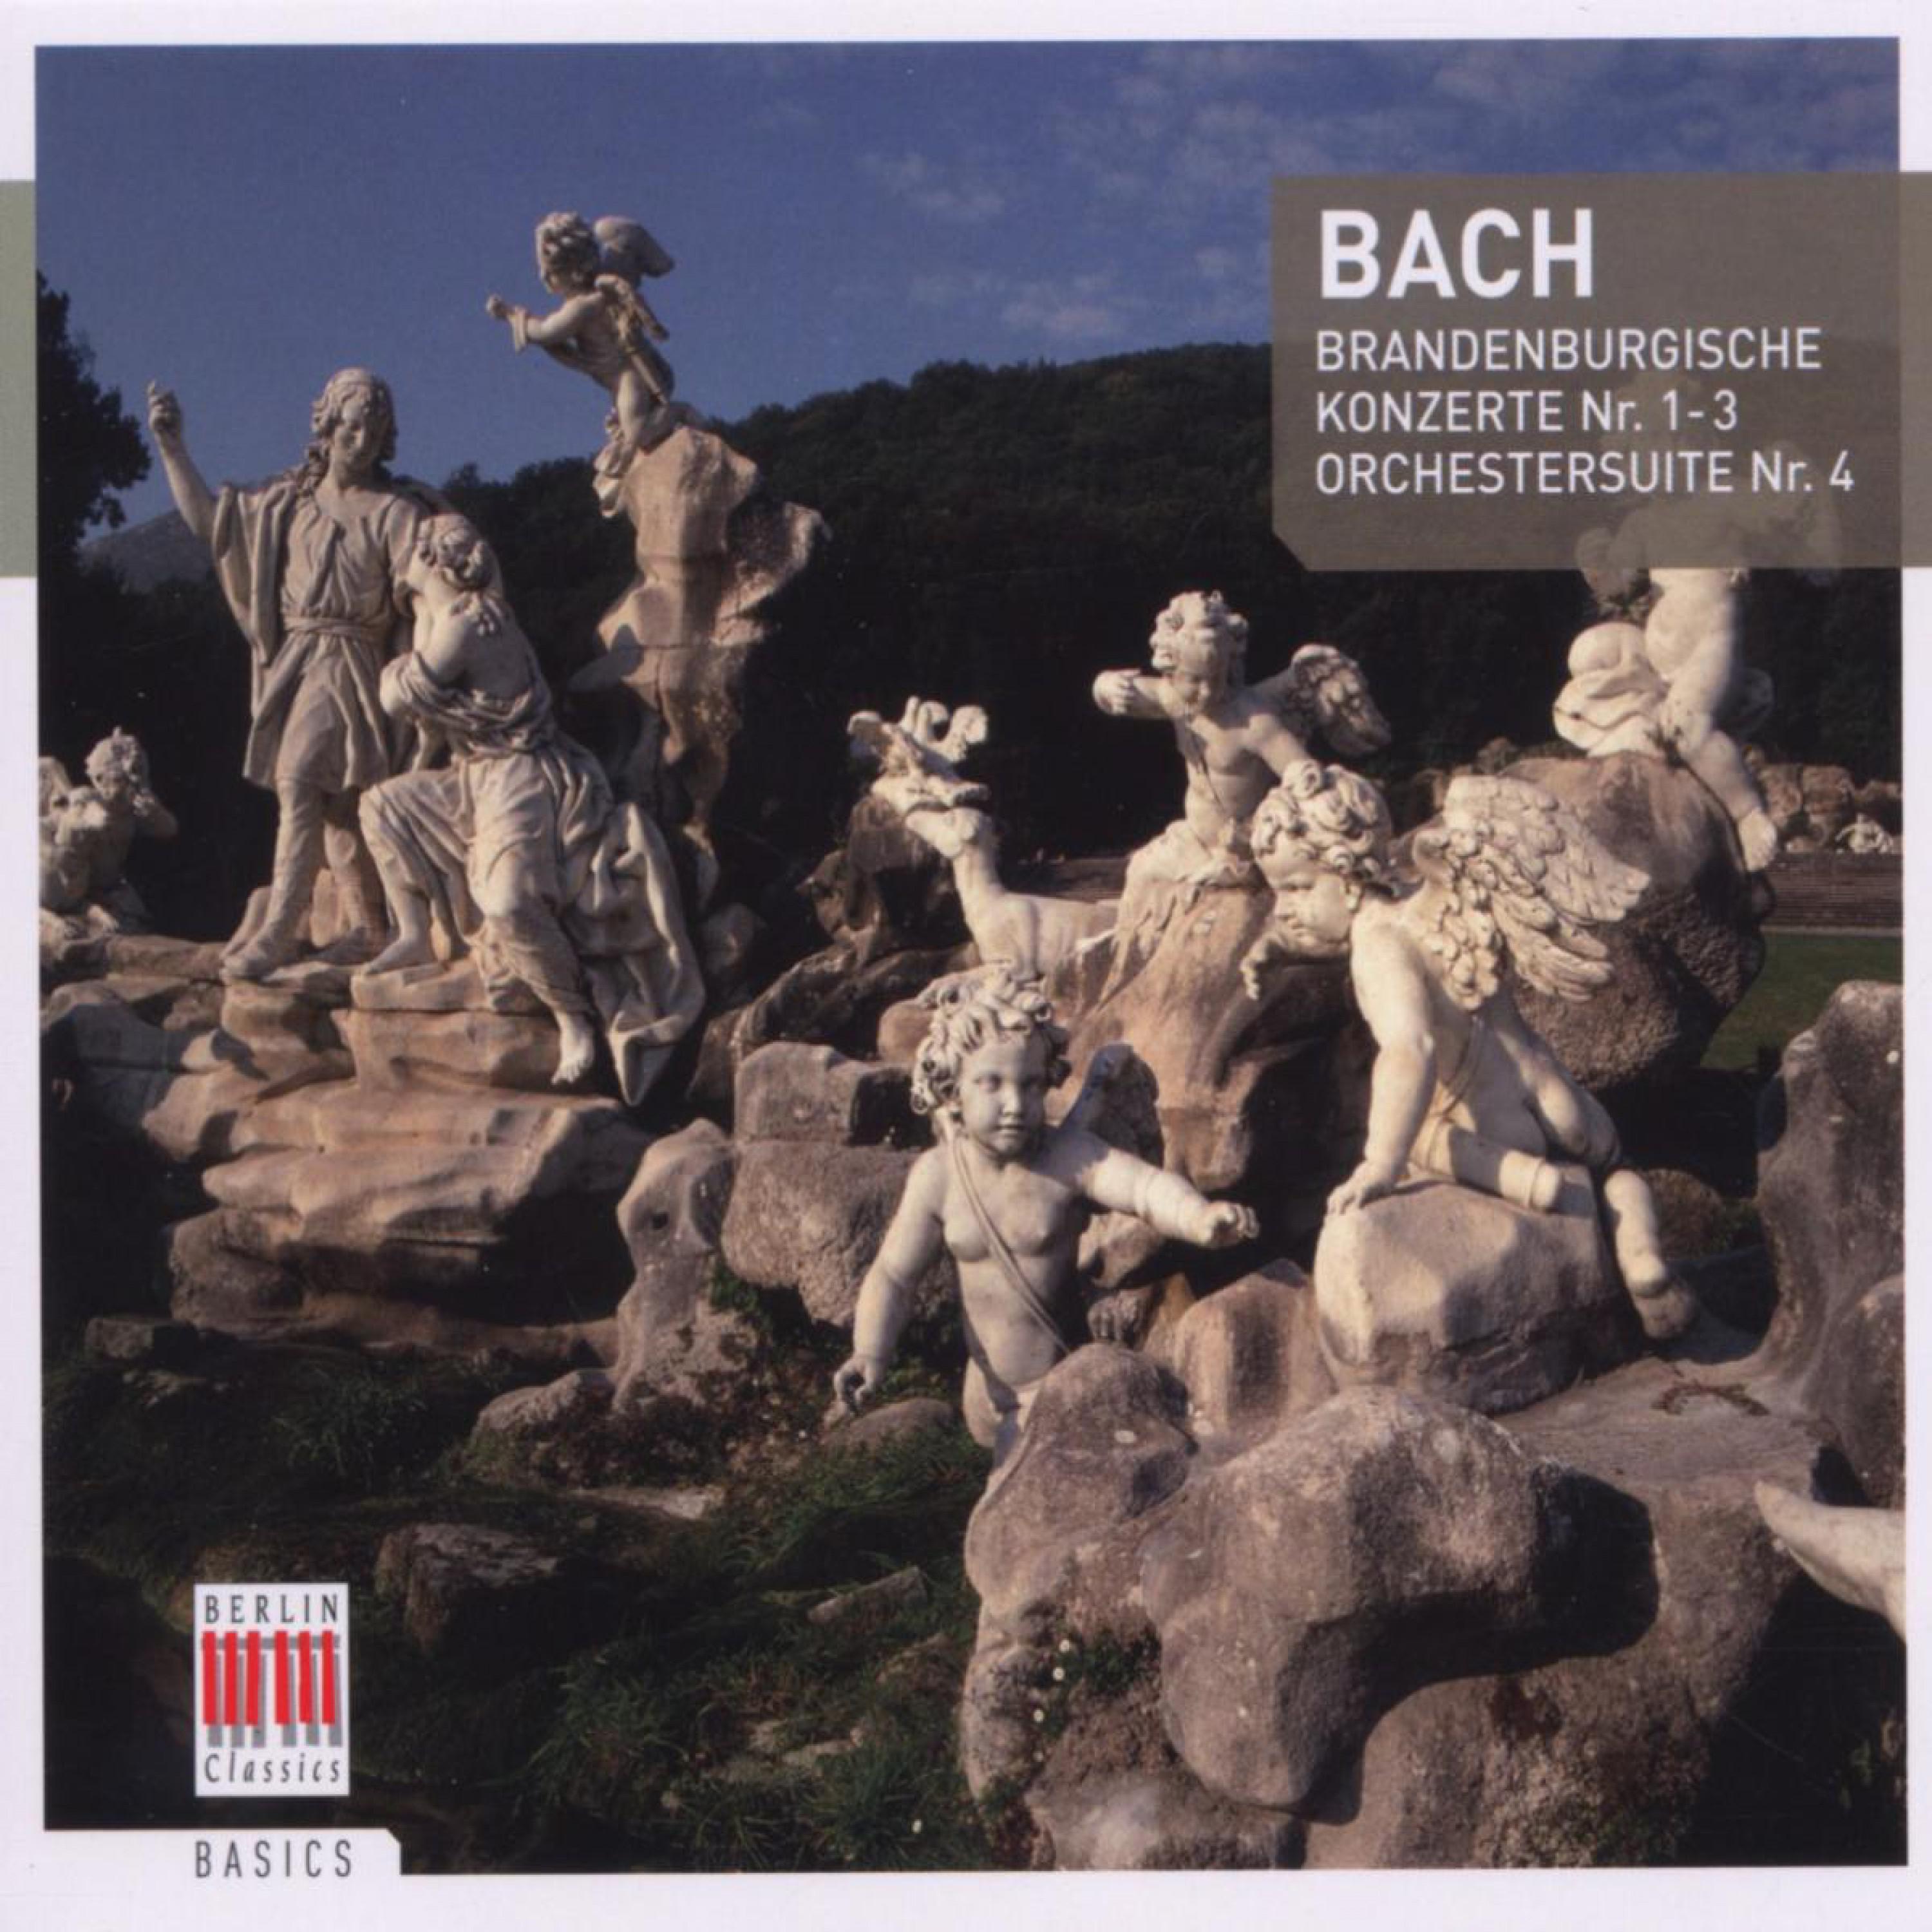 Orchestral Suite No. 4 in D Major, BWV 1069: II. Bourree I-II